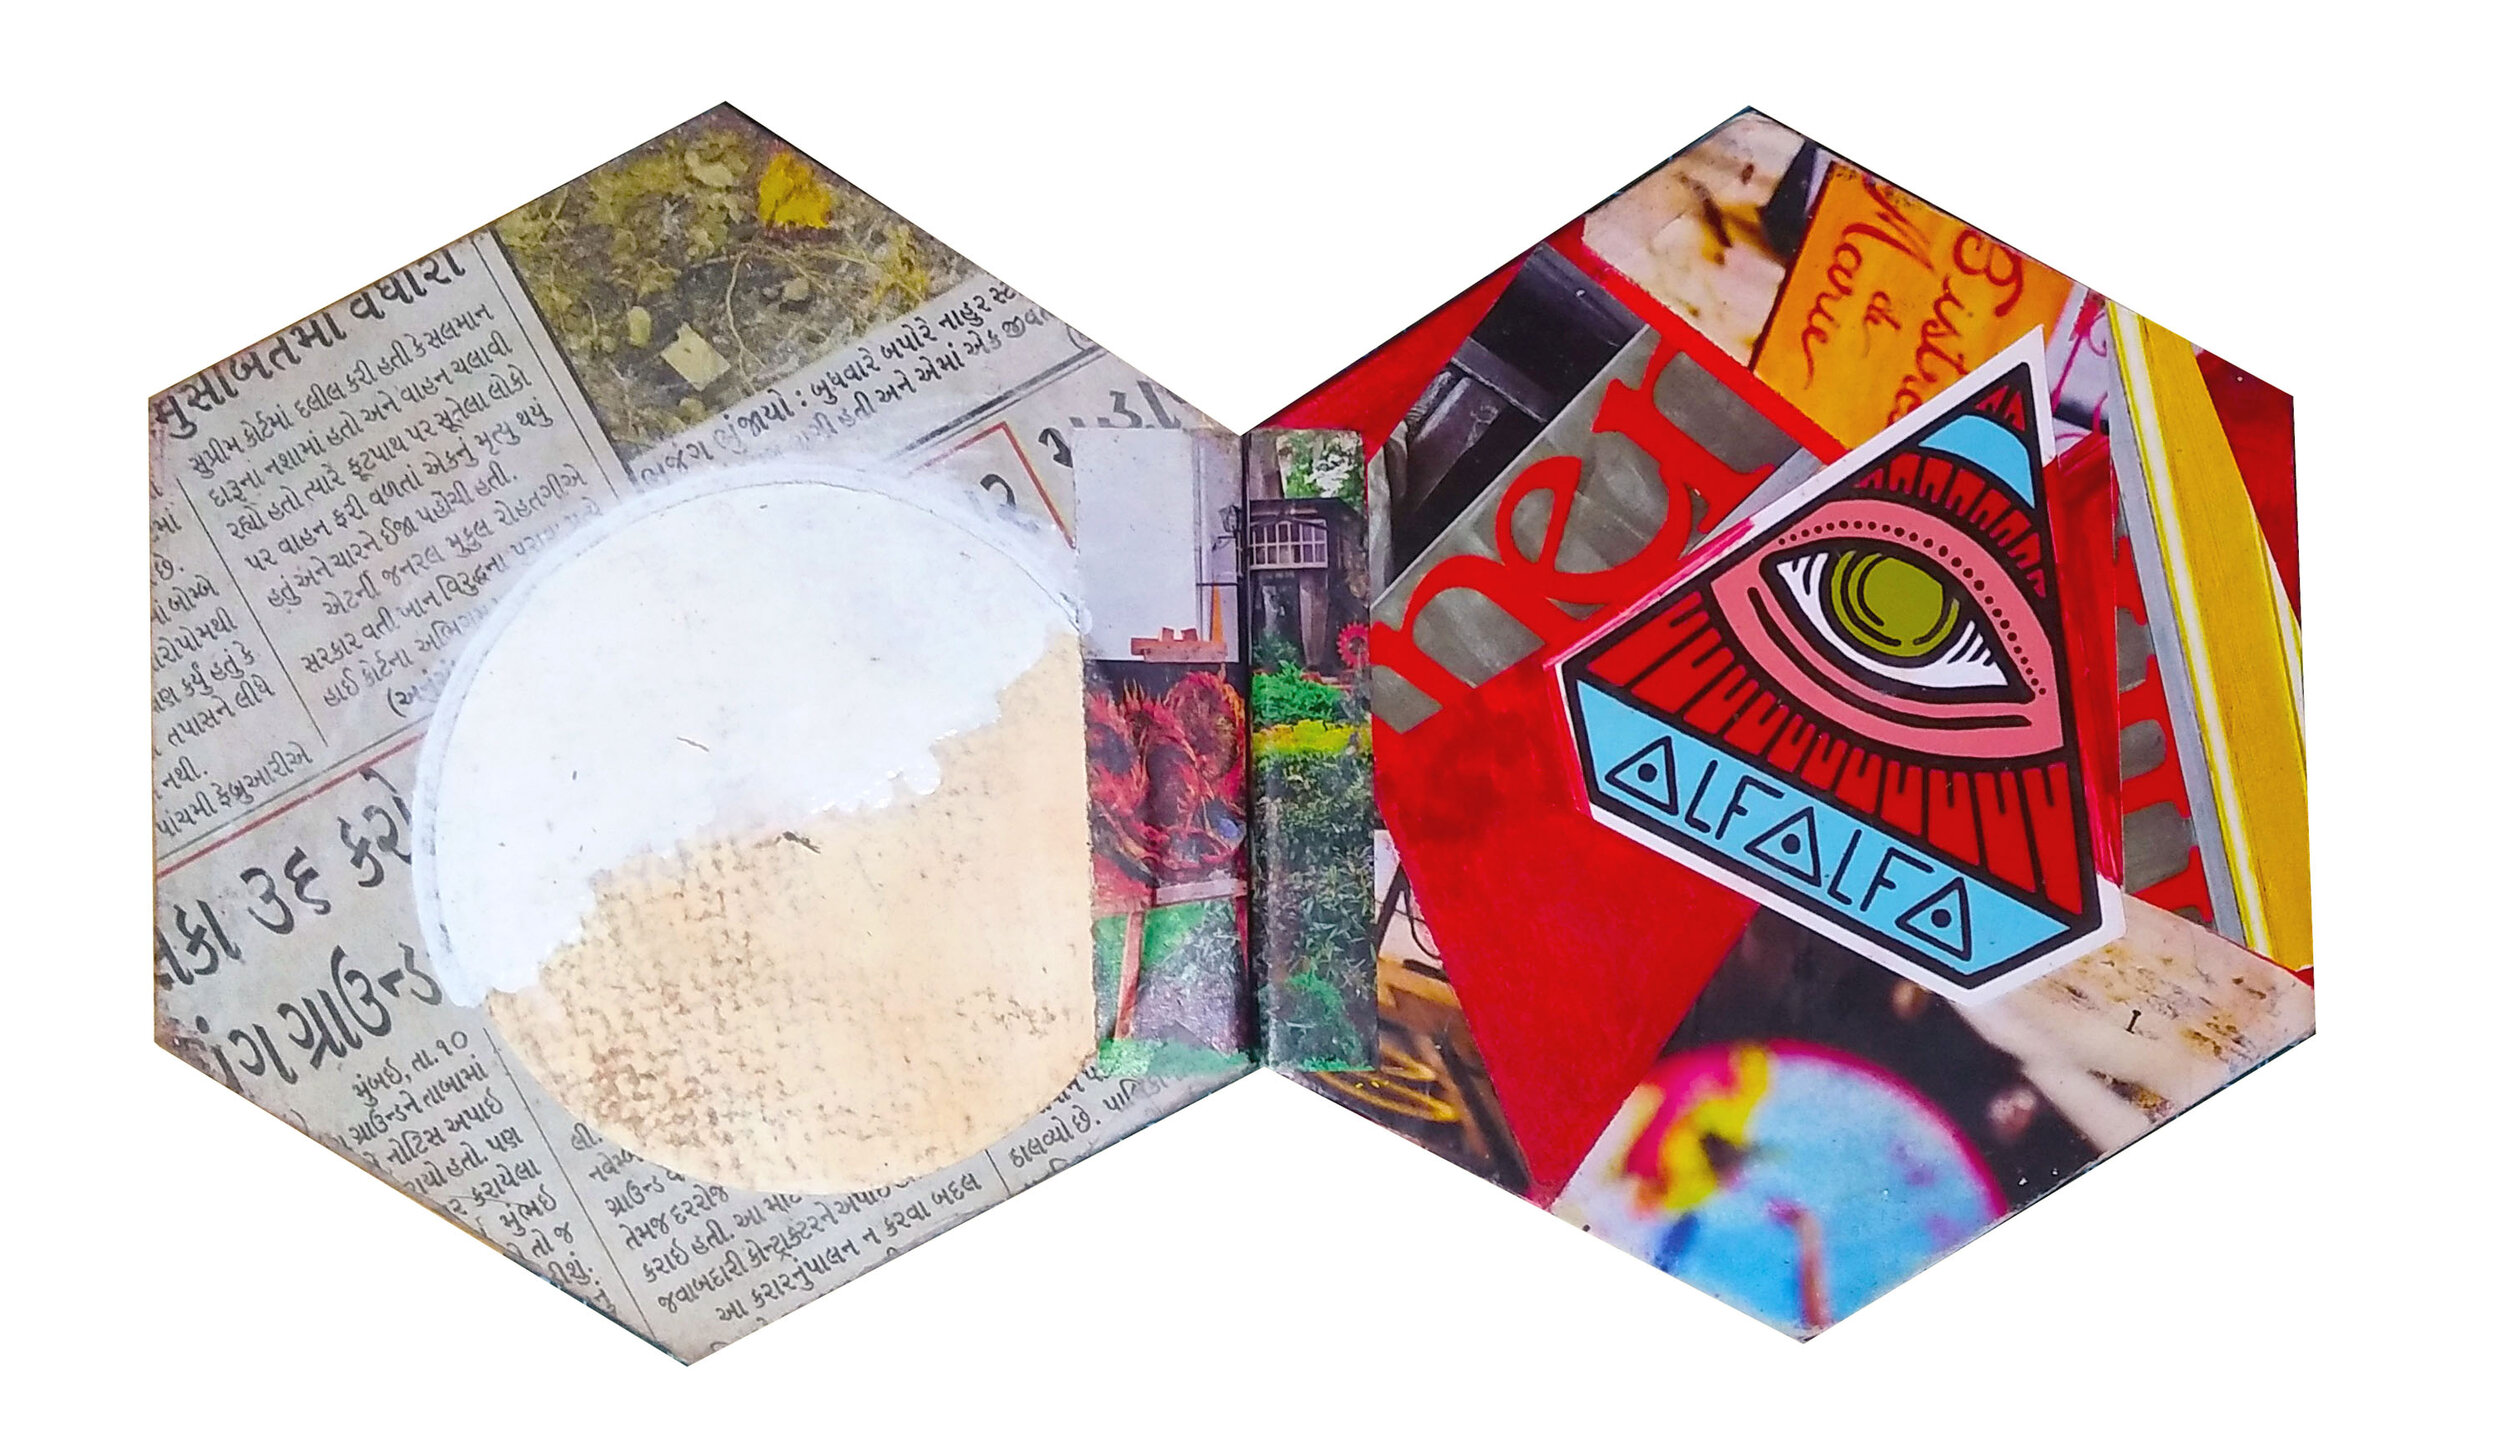 "All Over the Place" Hardback book, 14x14cm, mixed media and collage on paper, 2020